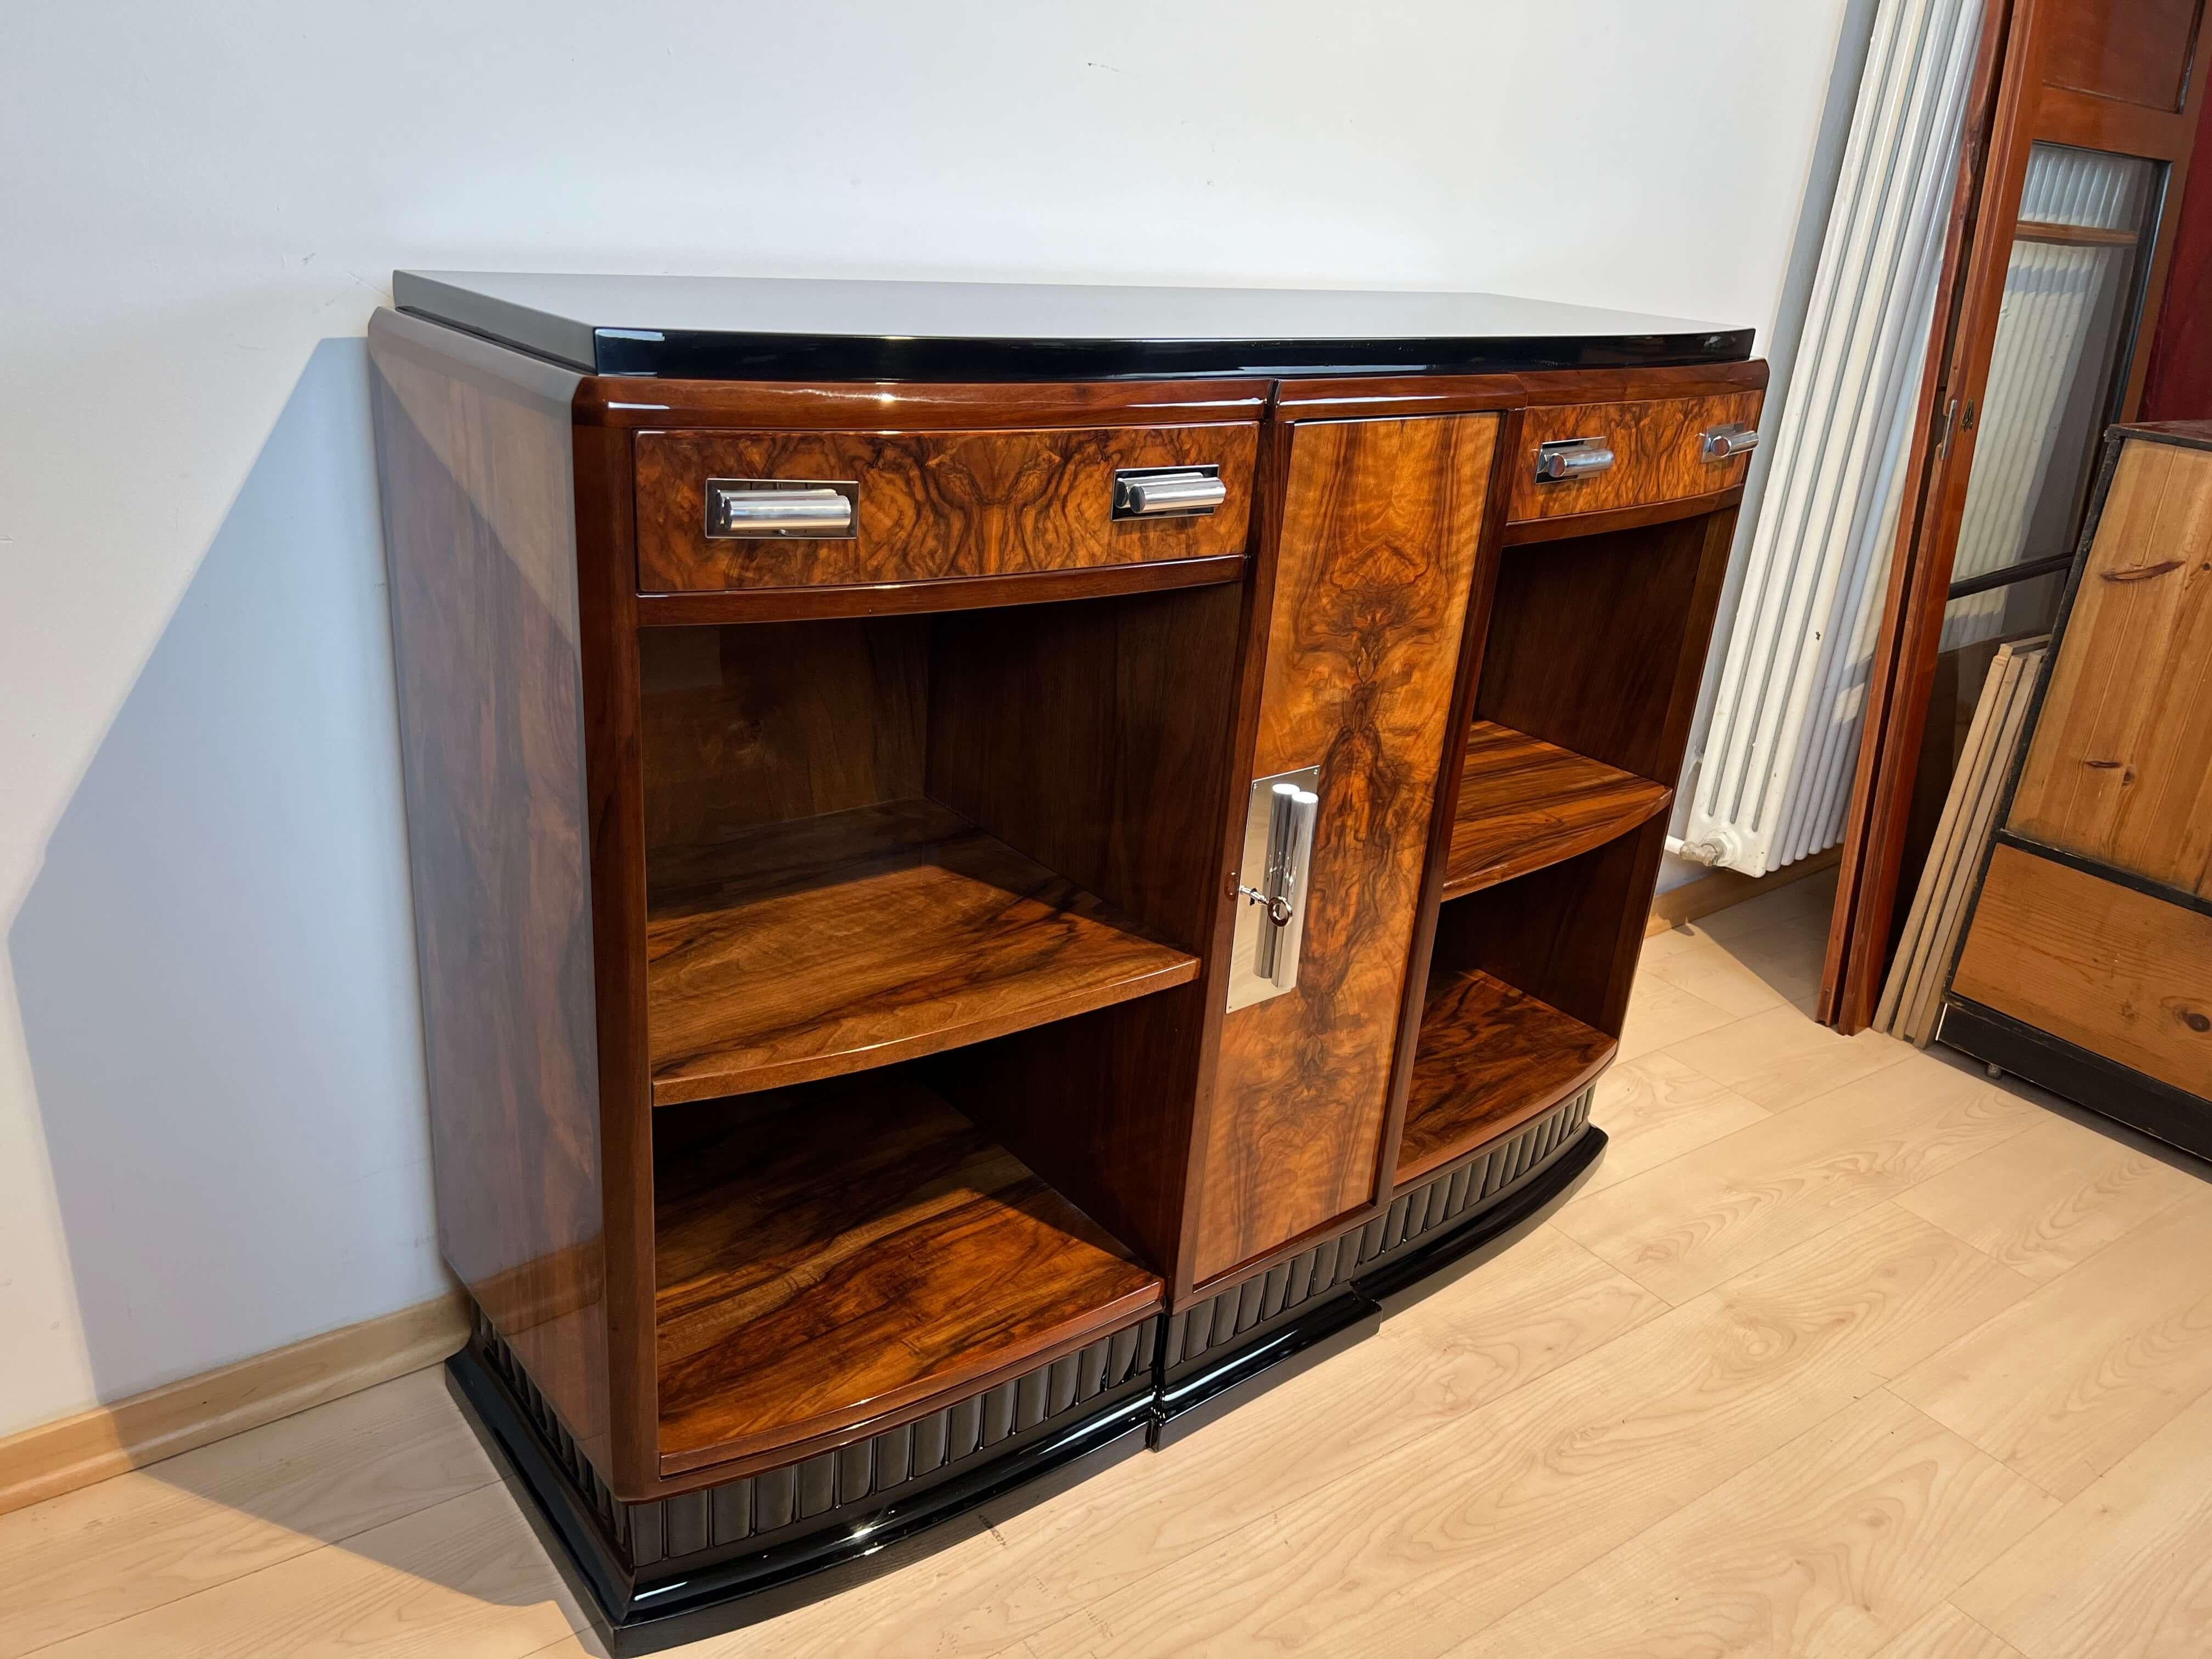 Small Art Deco Sideboard with Open Shelf / Cupboard in Walnut Veneer and black lacquer from France about 1930.

Walnut veneered and solid, partly ebonized. Lacquered high gloss surface. Above with black lacquered wooden plate. Chromed and polished